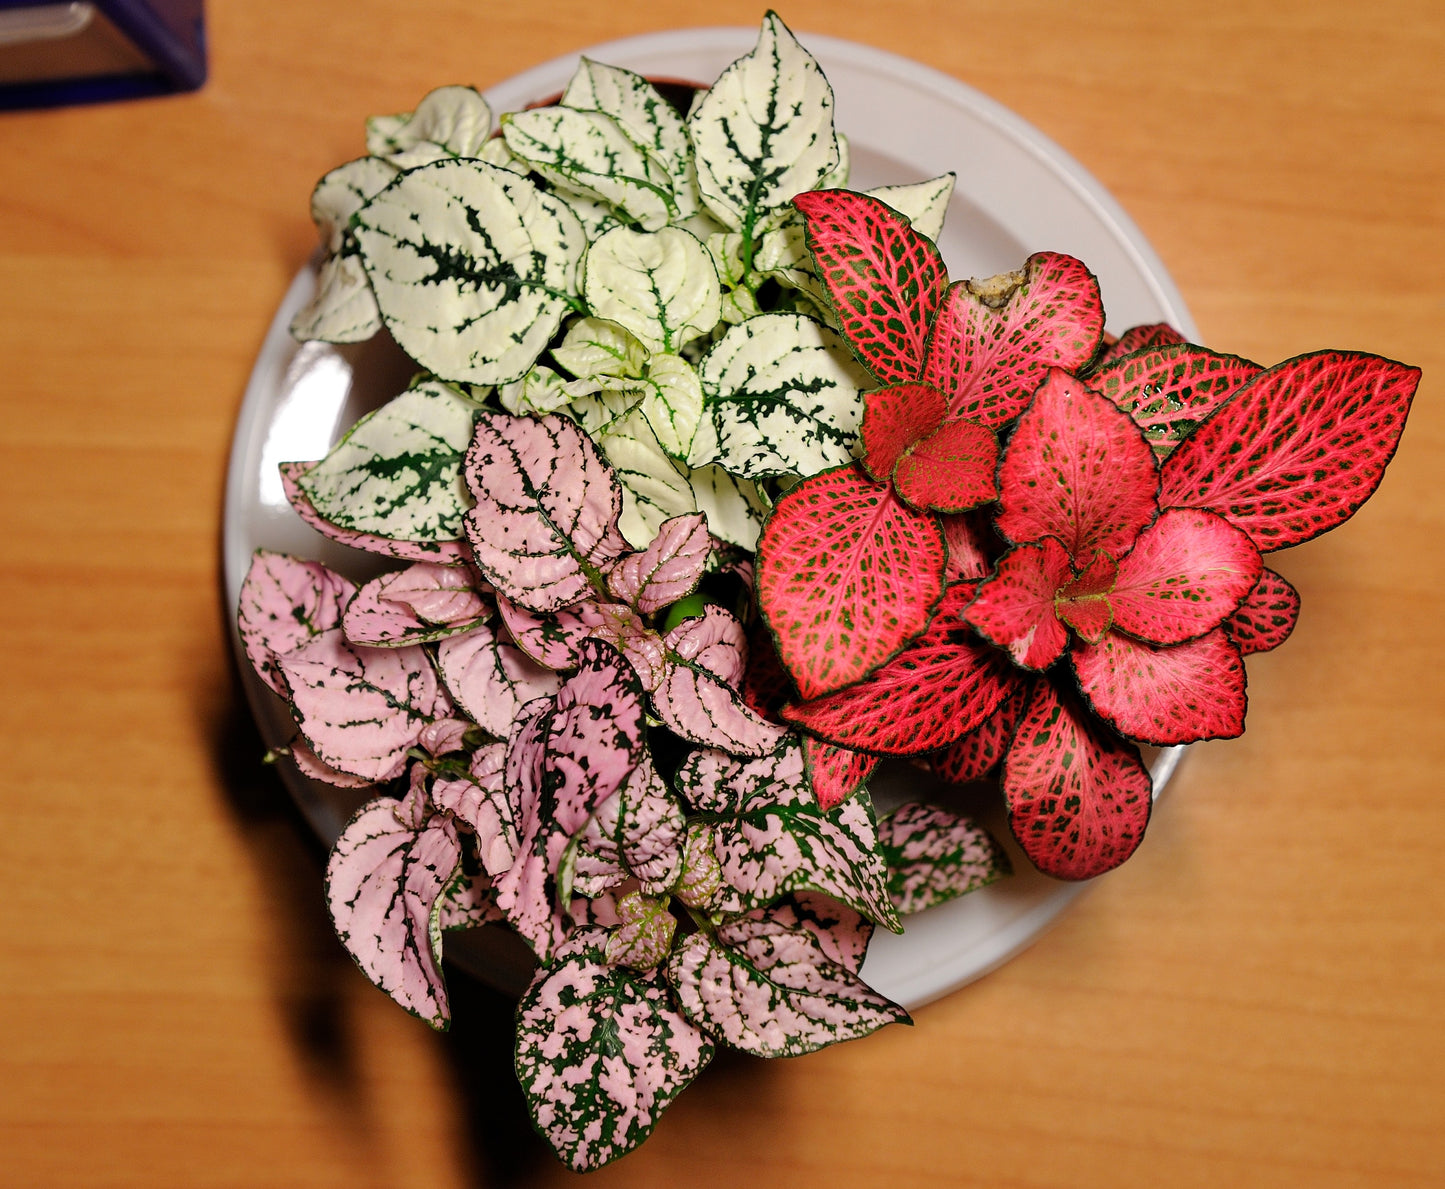 10 Dwarf Mixed Colors POLKA DOT PLANT Red Pink White Rose Splash Select Hypoestes Phyllostachya Flower Houseplant Seeds